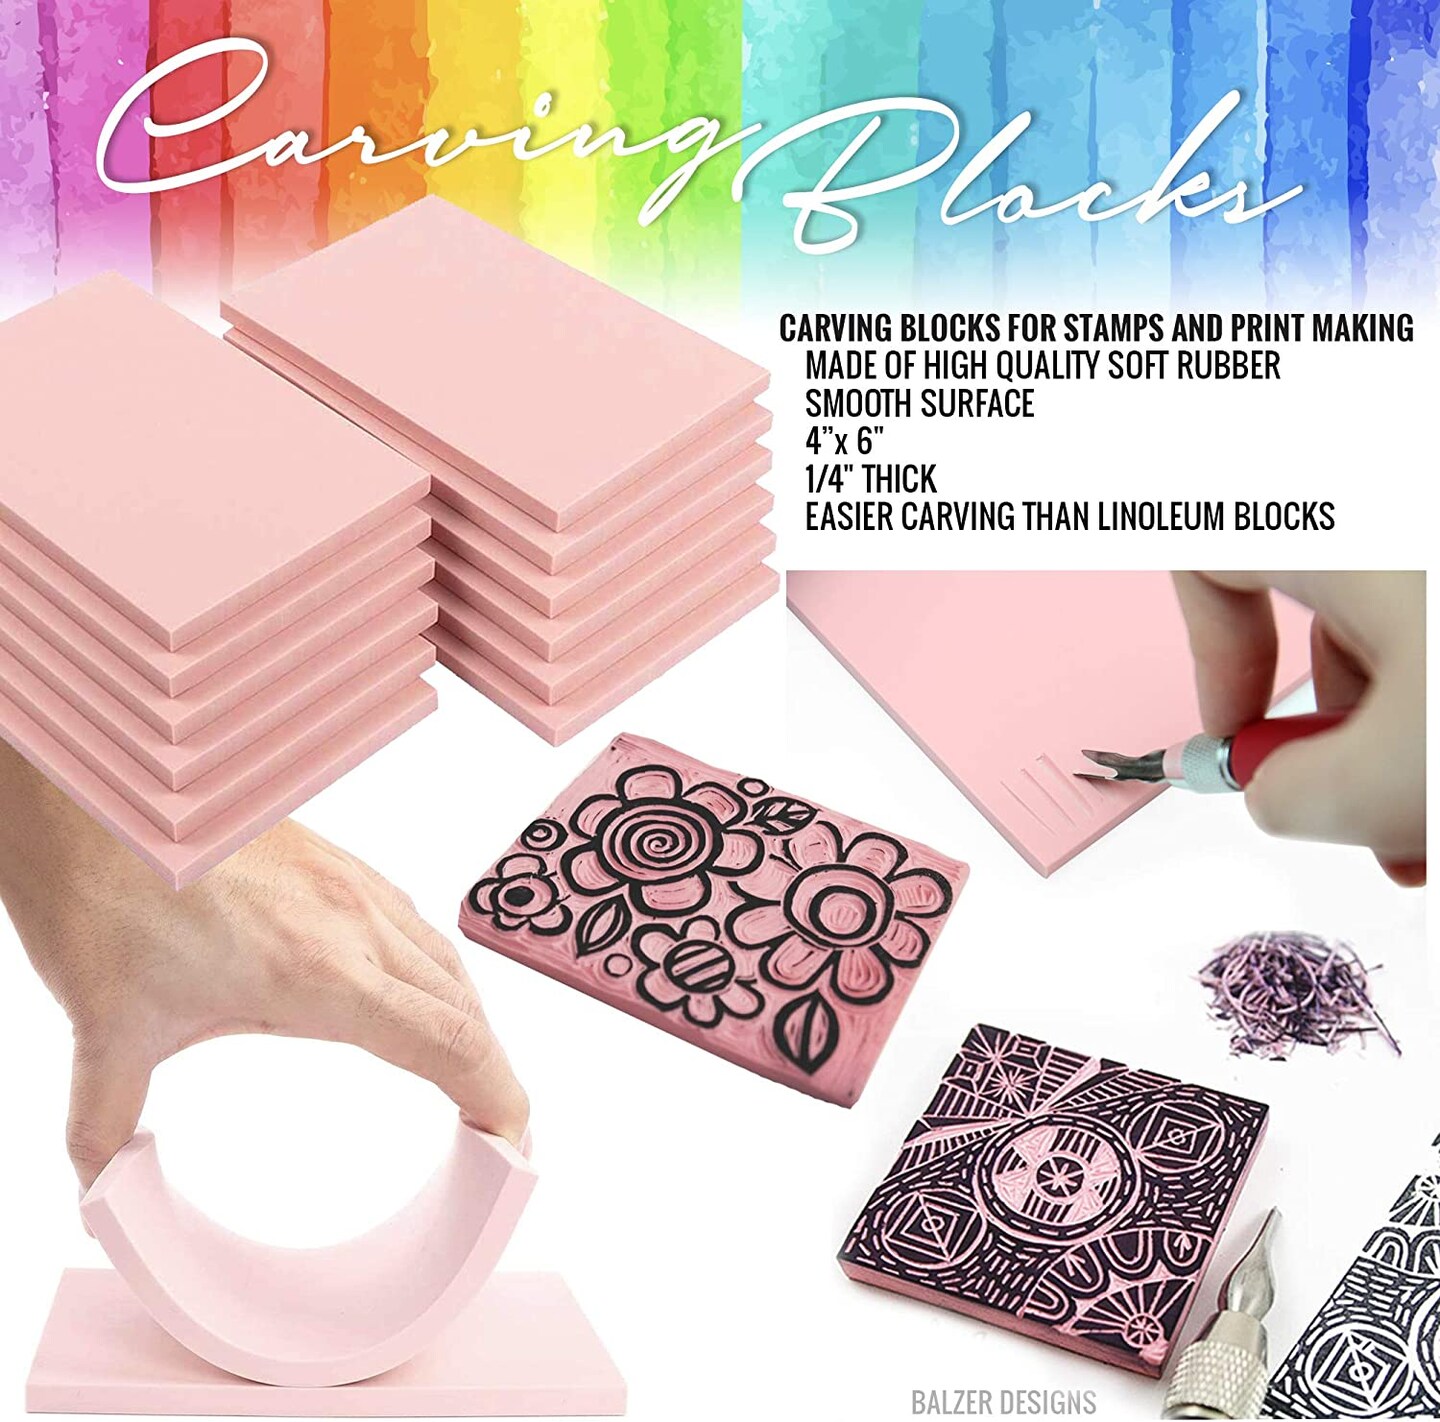 Linoleum Blocks for Printmaking (6pack) and Stamp Carving Tool - Printmaking  Supplies for Rubber Stamp Carving Block Printing - Linoleum Carving Tools  and lino Rubber Block Stamp Carving kit